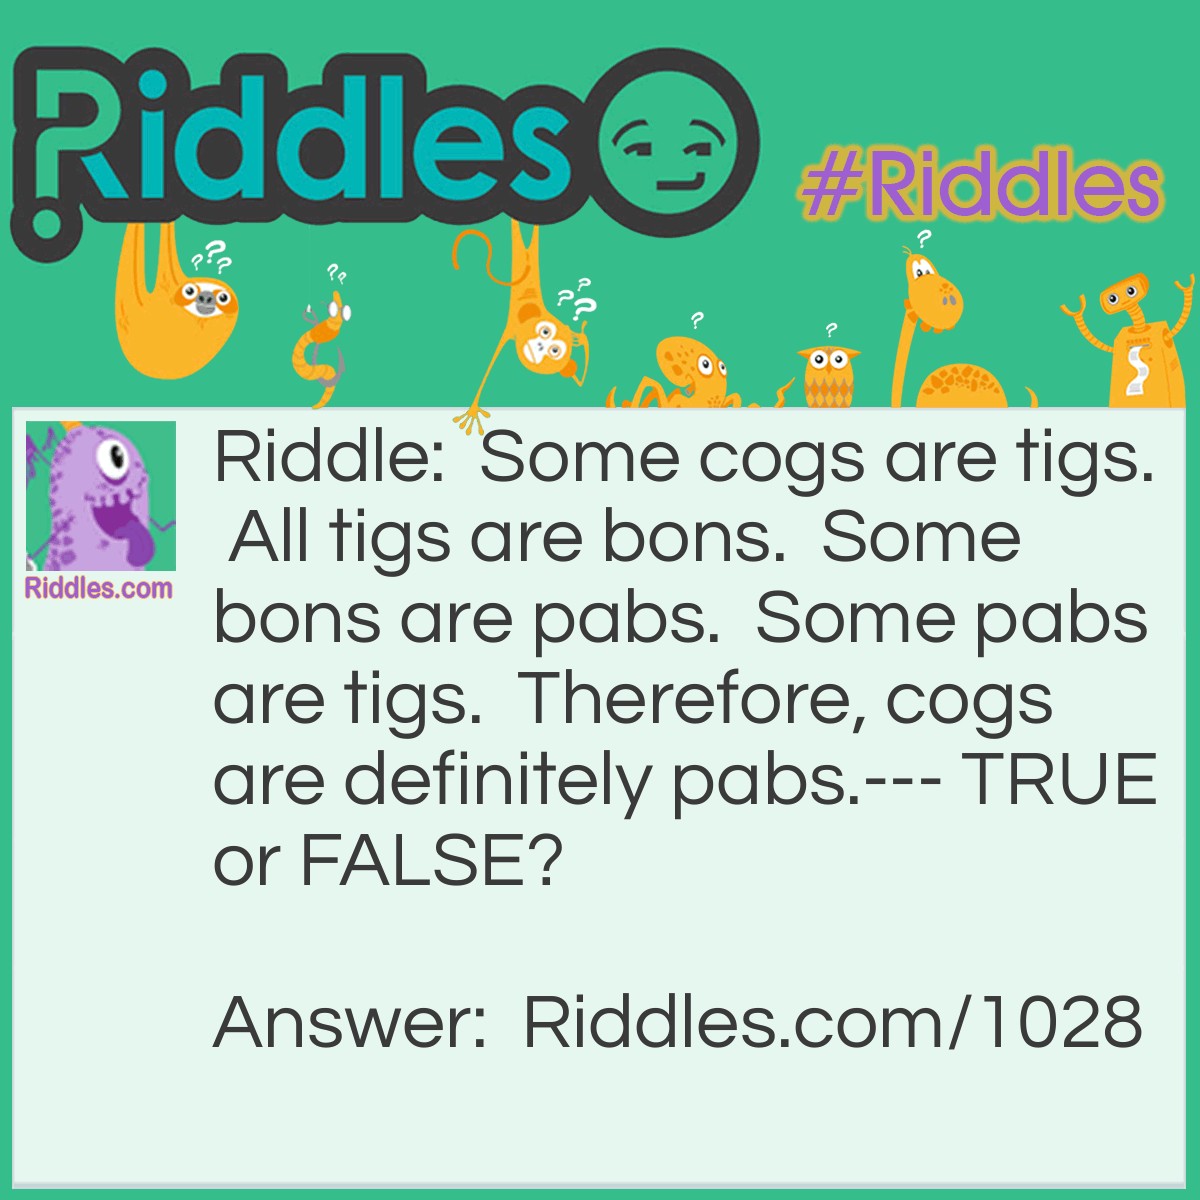 Riddle: Some cogs are tigs.  All tigs are bons.  Some bons are pabs.  Some pabs are tigs.  Therefore, cogs are definitely pabs.--- TRUE or FALSE?   Answer: False. Some cogs may be pabs, but not definitely all of them.